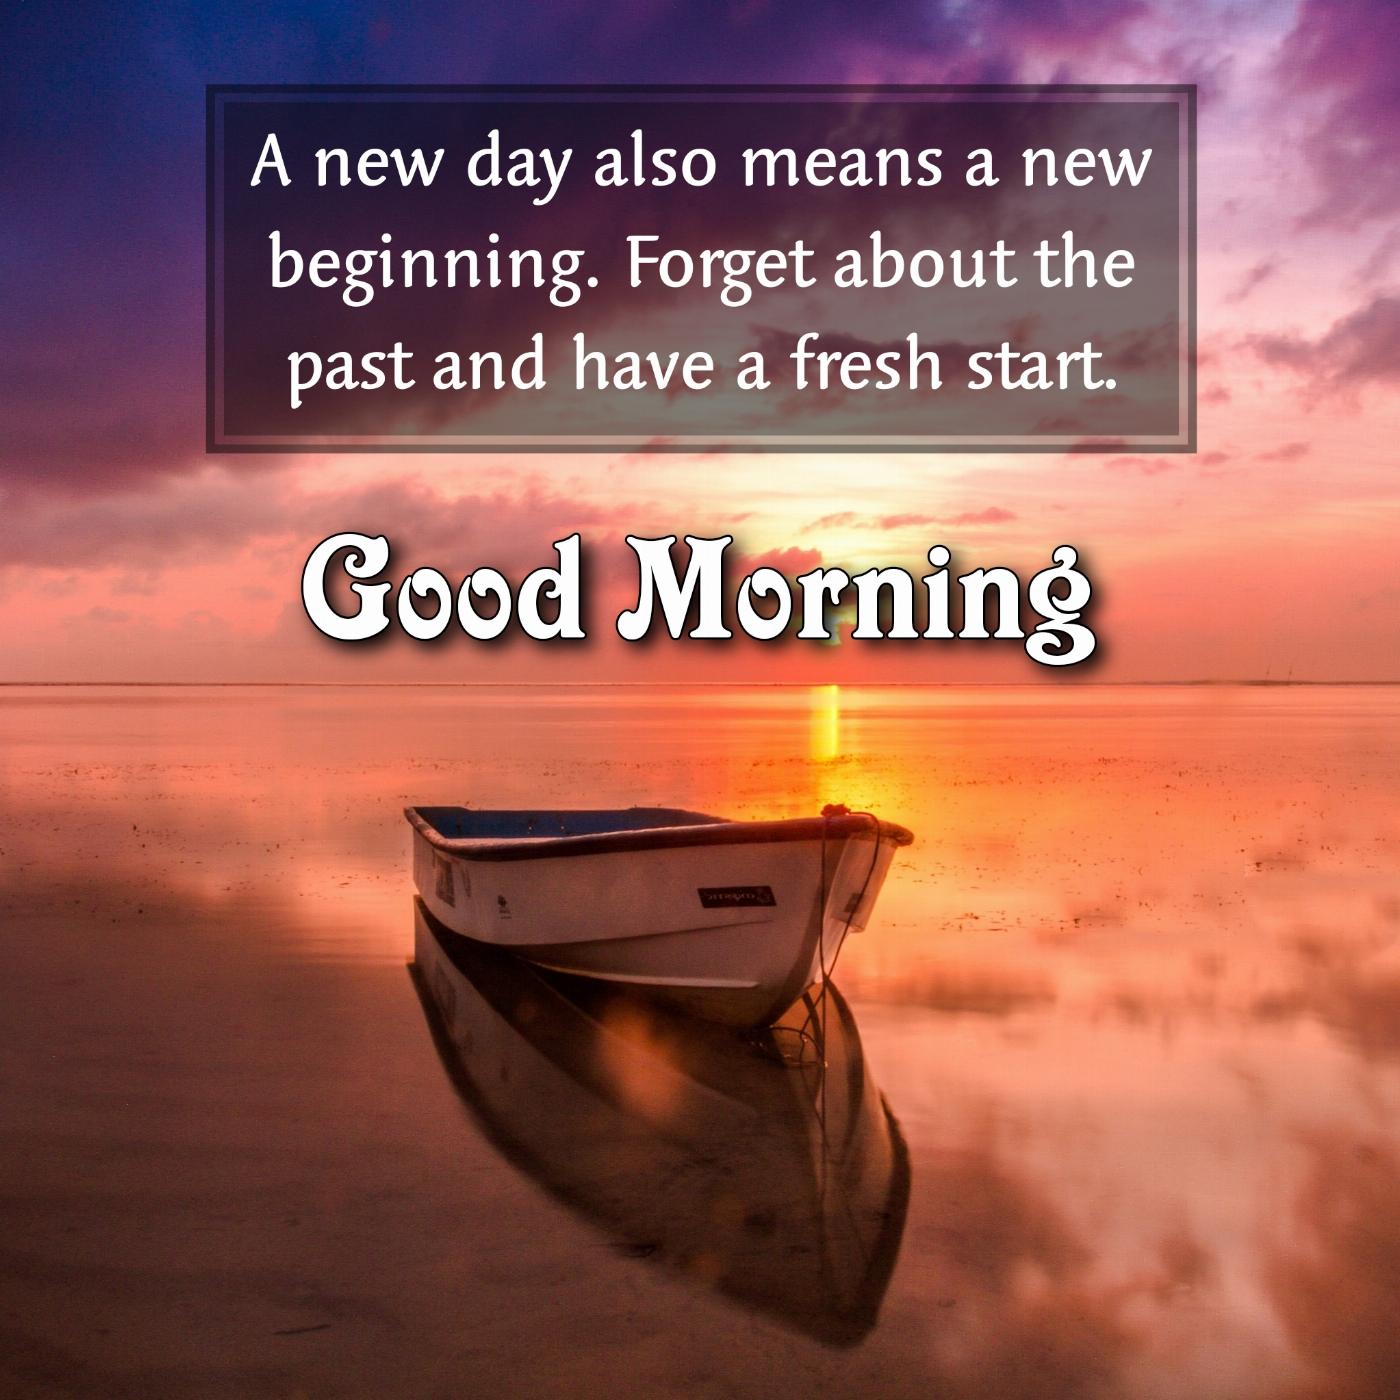 A new day also means a new beginning